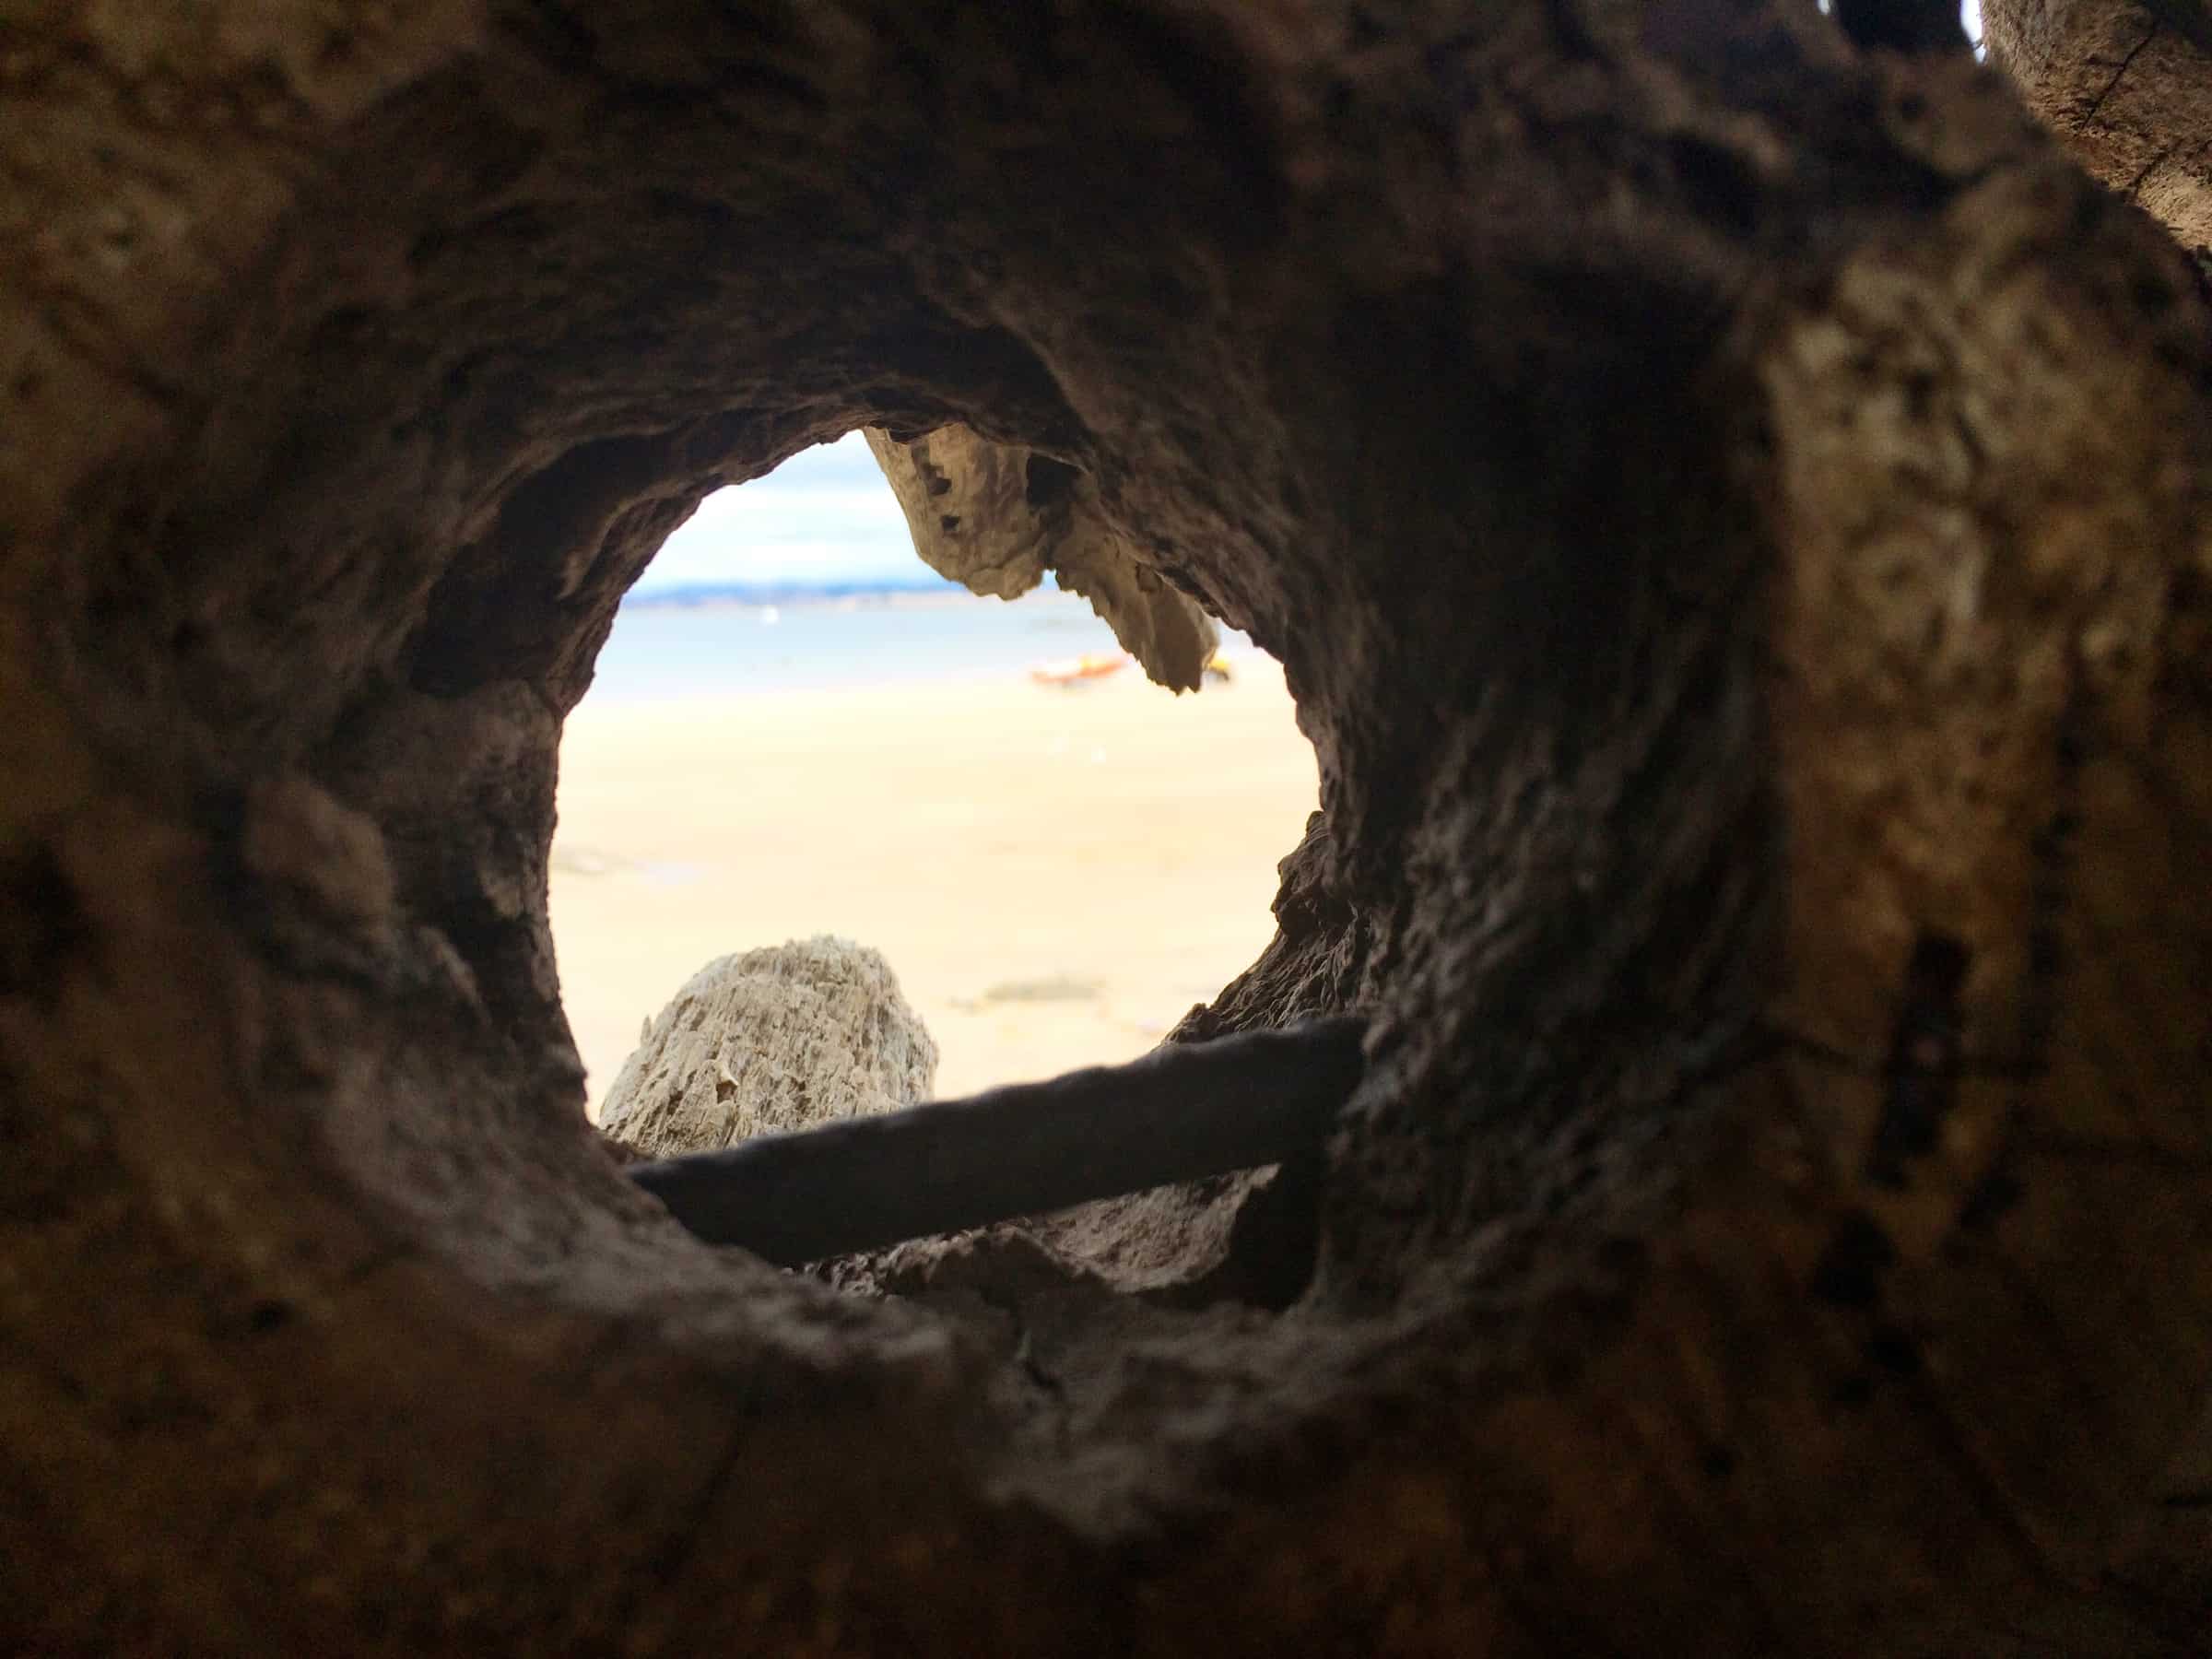 A 'spy hole' from Marcus Tatton's Seaspores at Mersey Bluff 